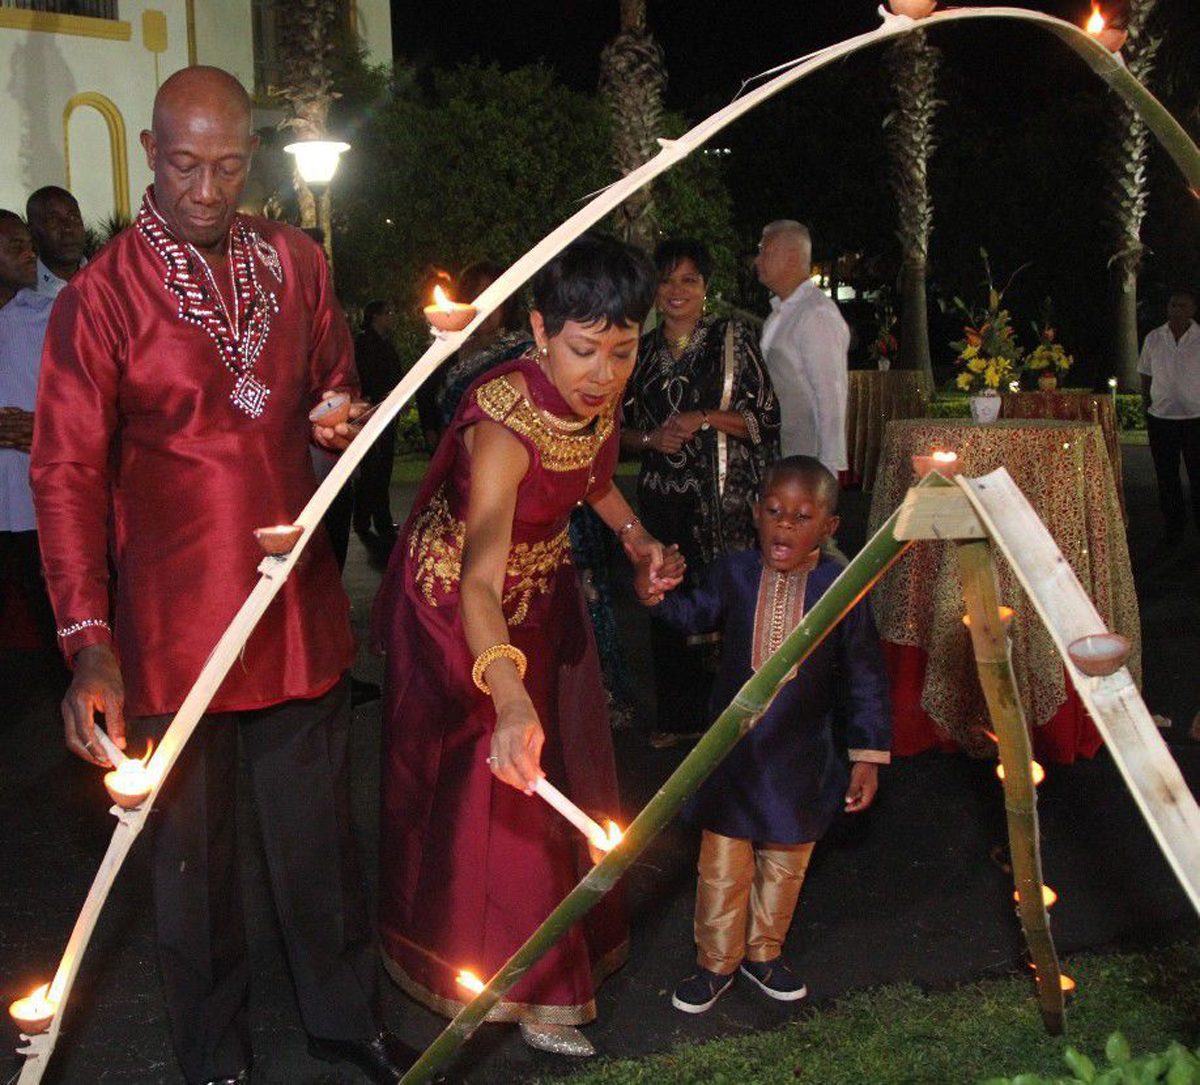 Trinidad & Tobago Prime Minister Dr Keith Rowley, his wife Mrs Sharon Rowley and their grandson light deyas at the Diplomatic Centre